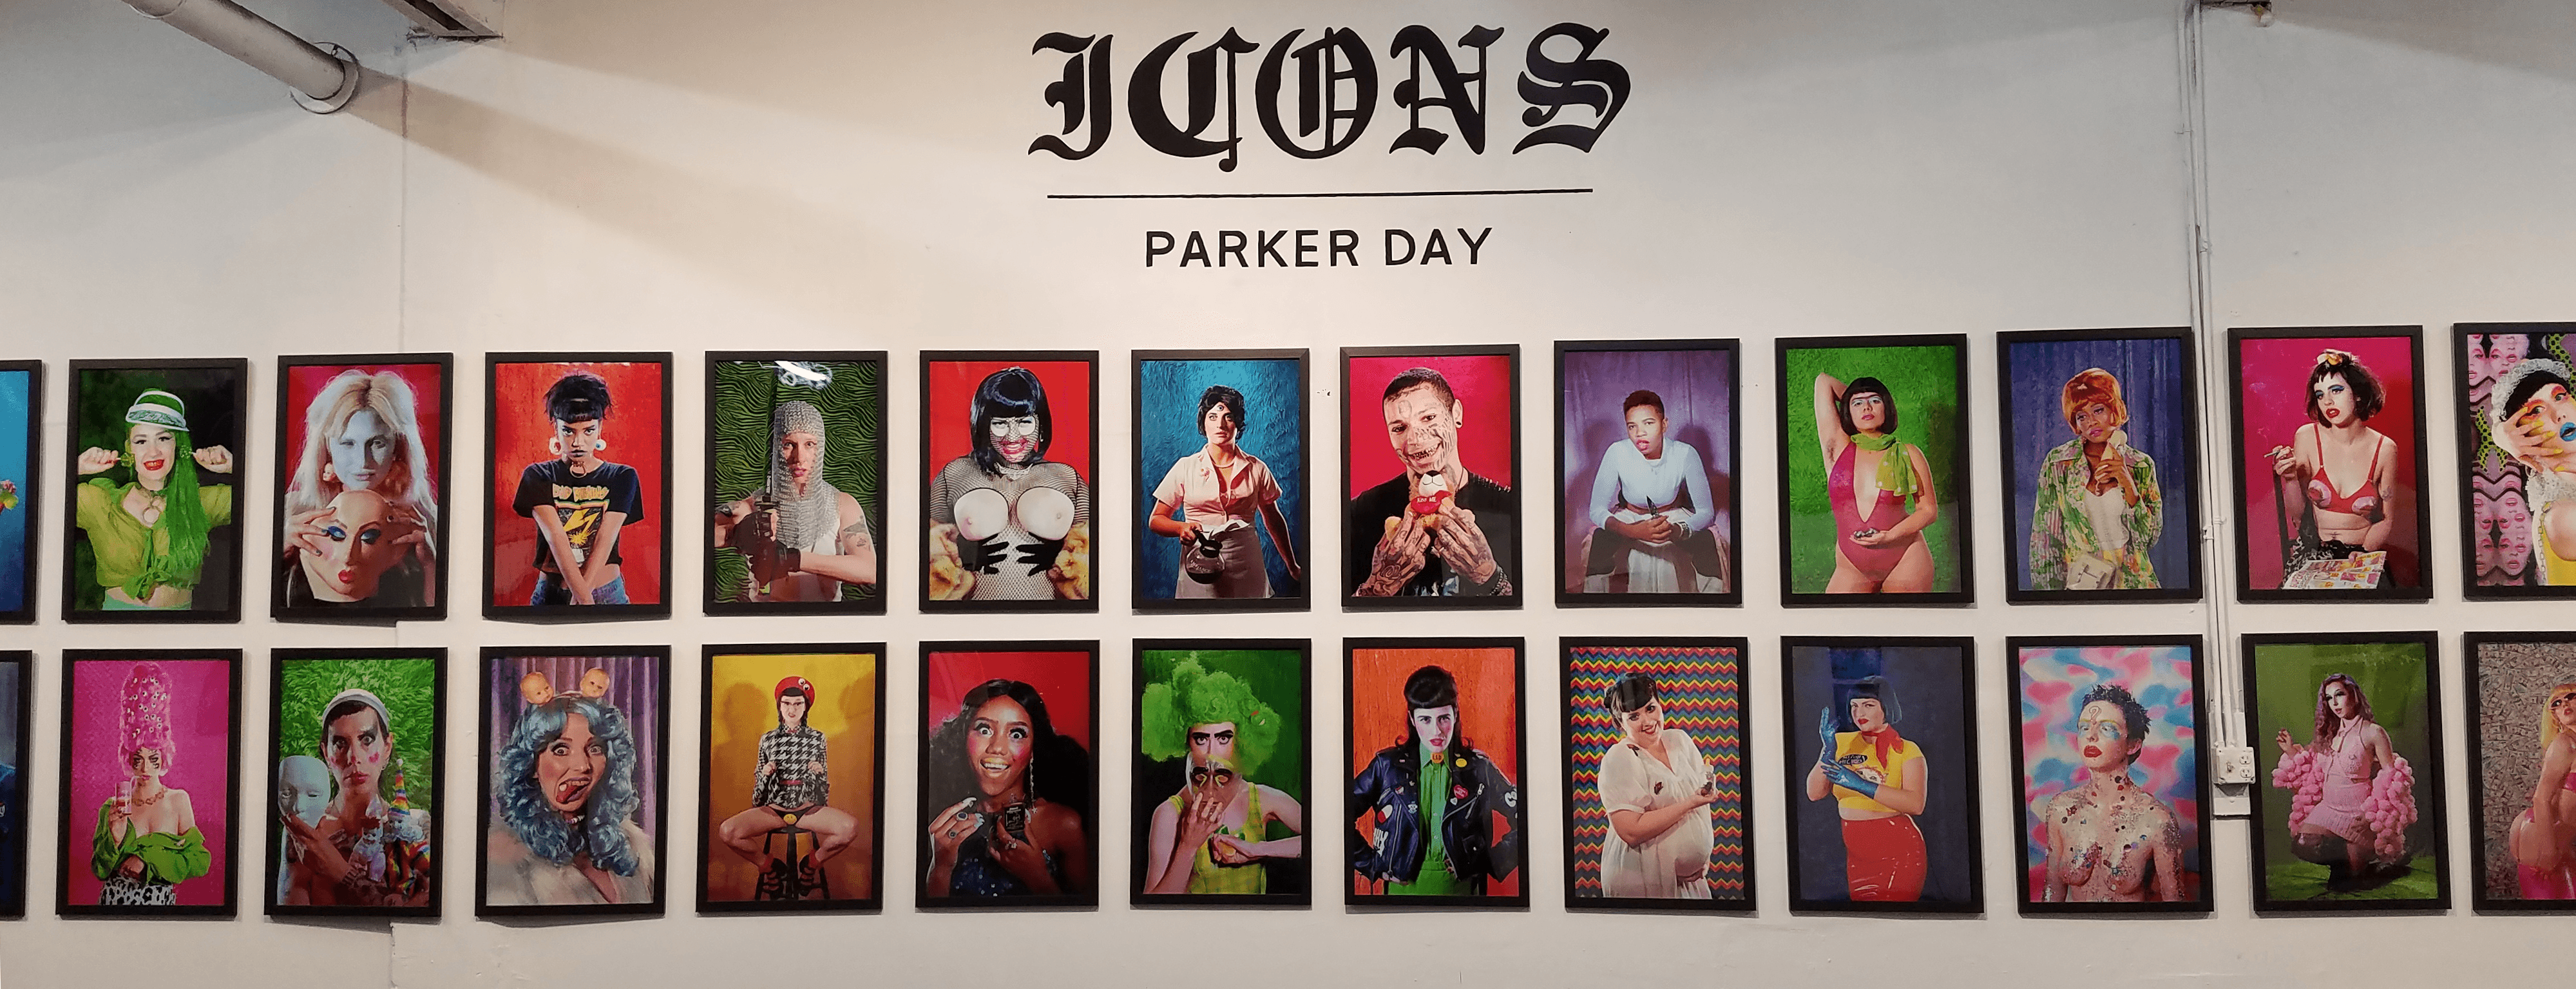 parkerday banner